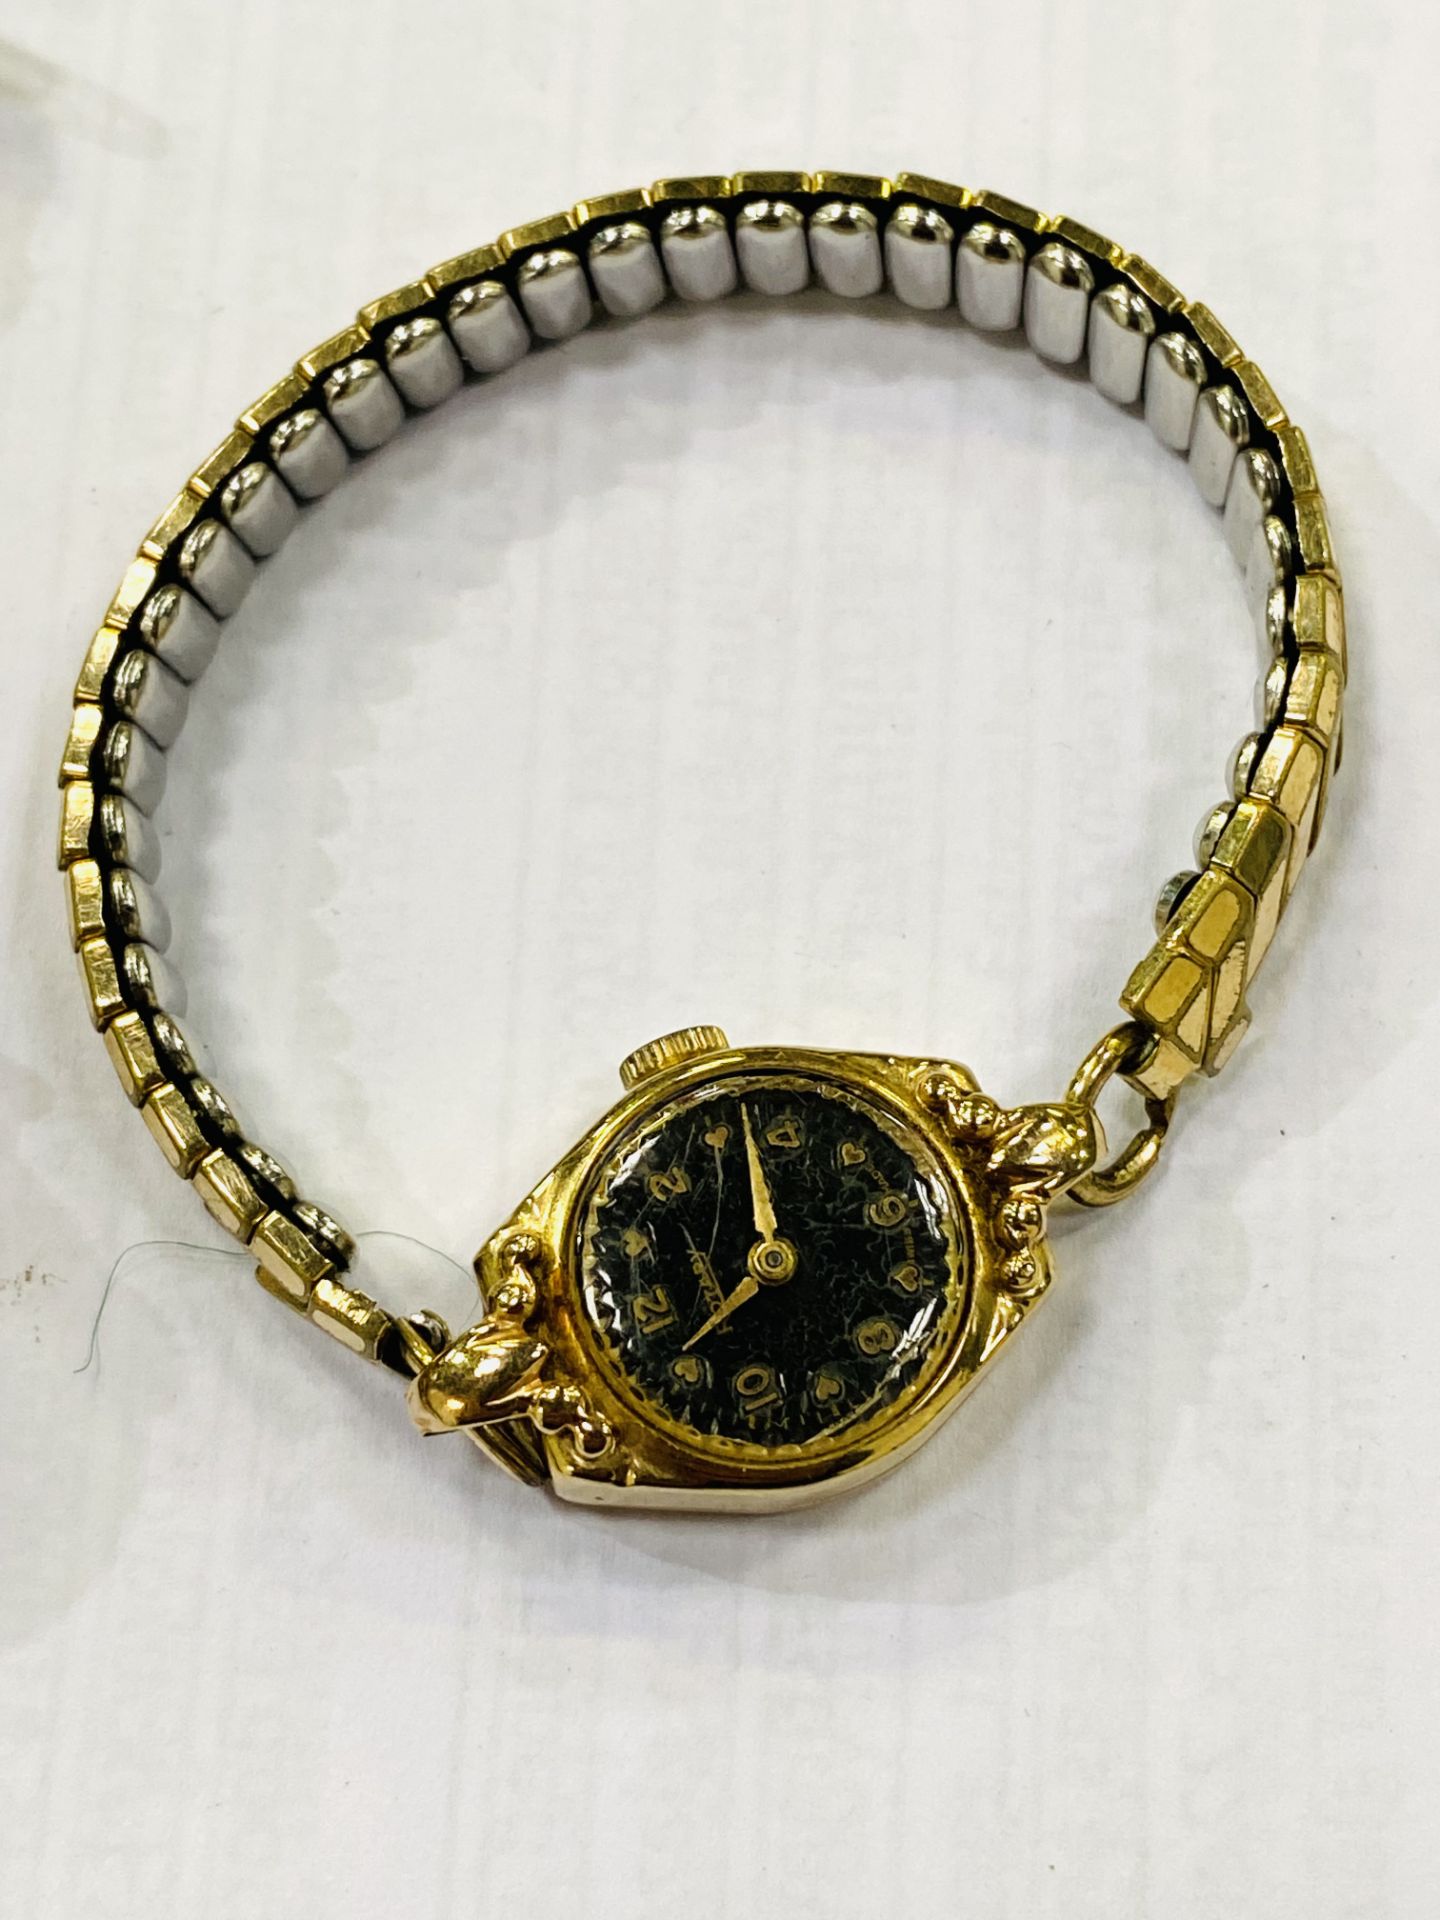 9ct gold cased wrist watch together with a 9ct gold cased Rotary wrist watch - Image 2 of 3